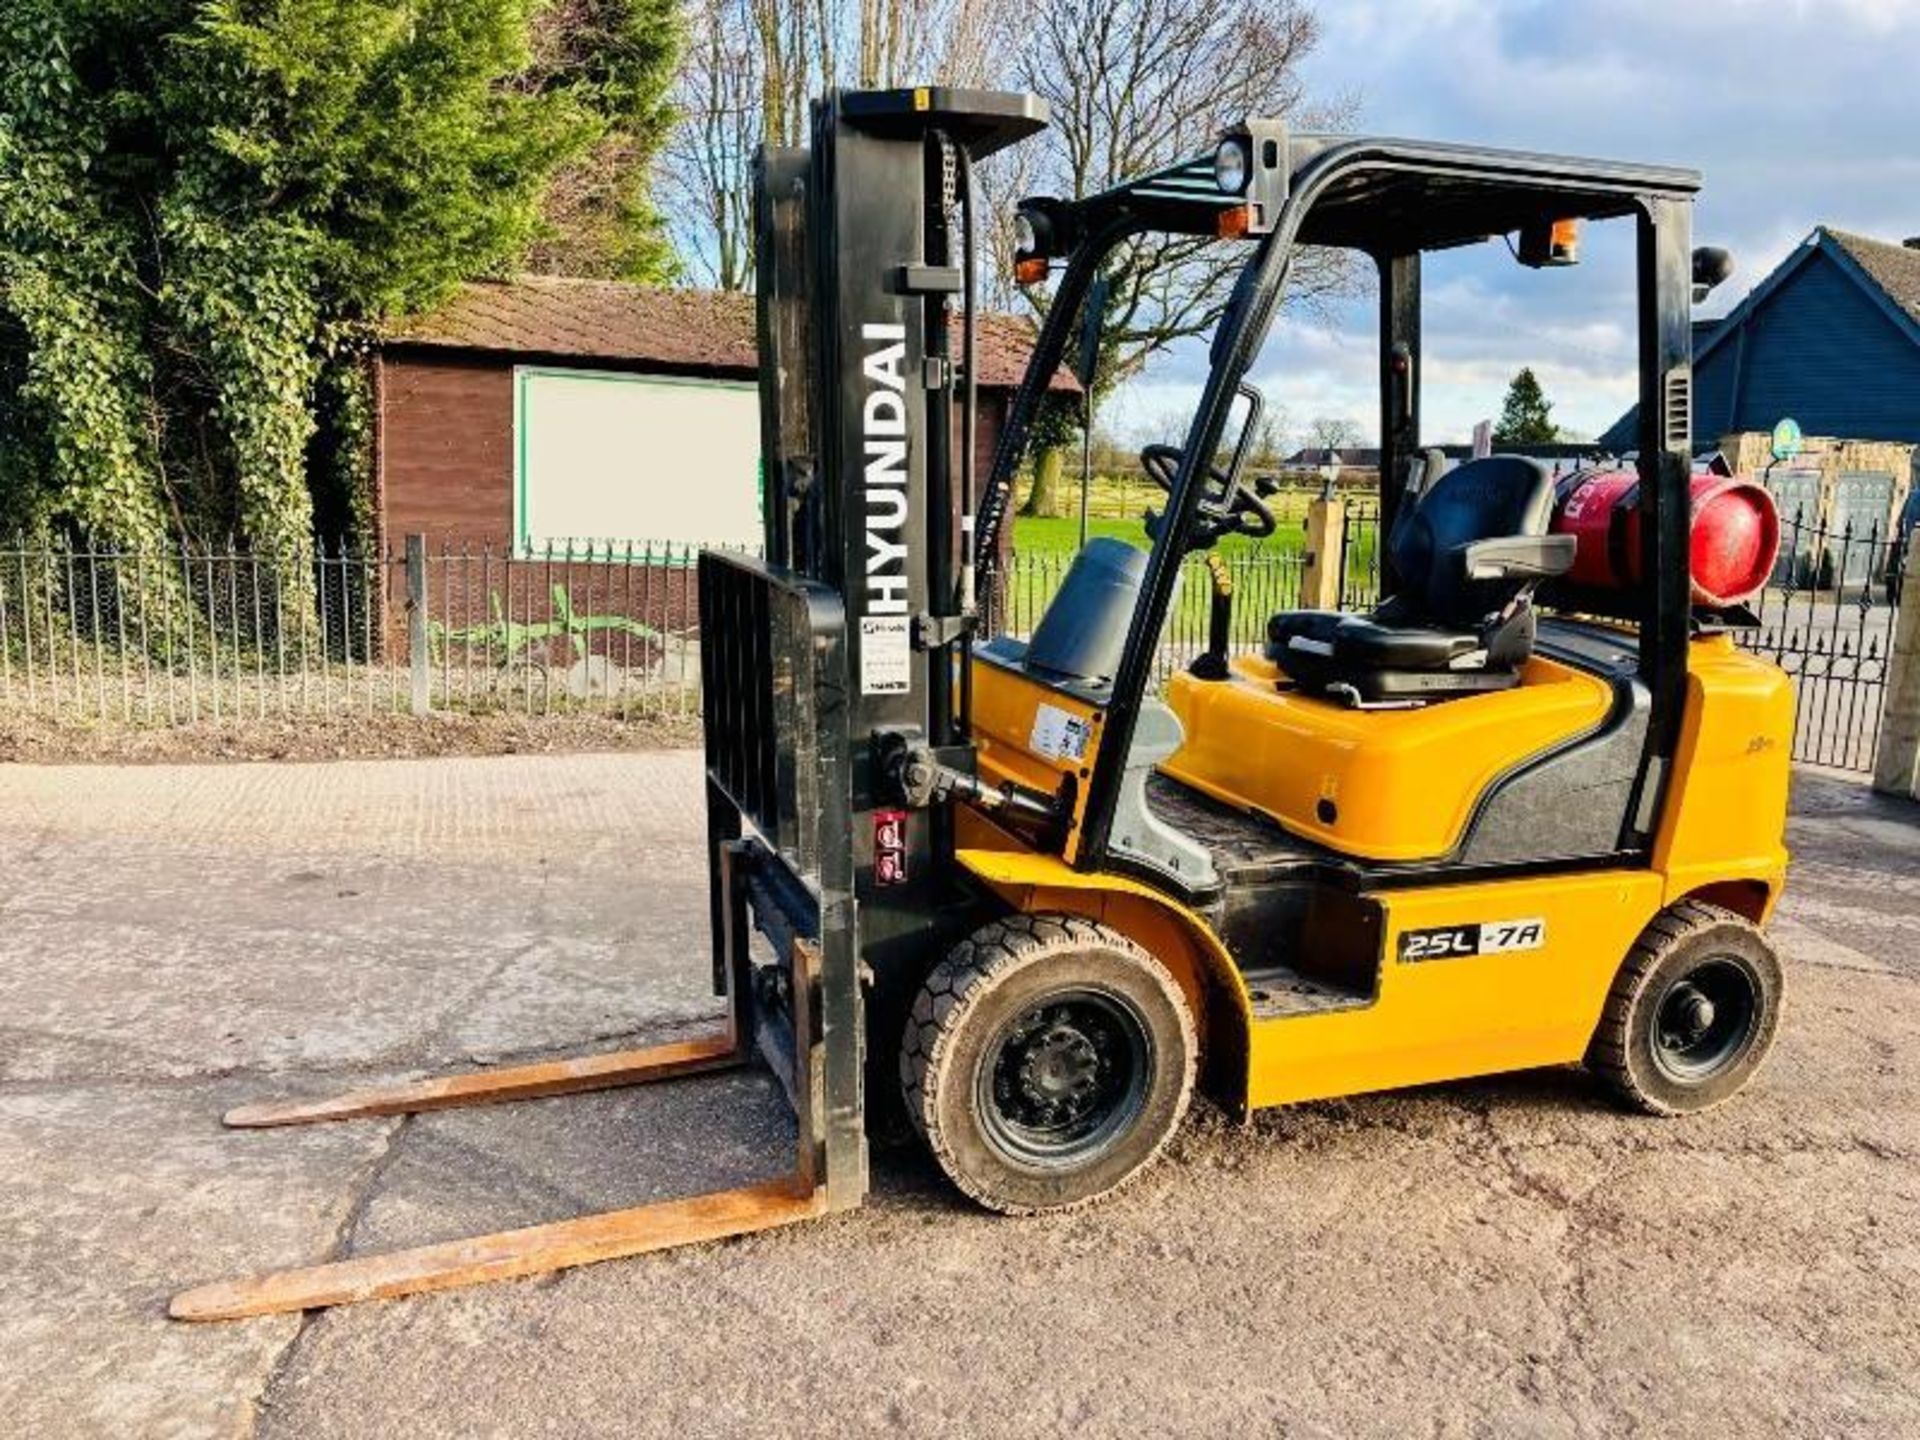 HYUNDAI 25L-7A CONTAINER SPEC FORKLIFT *YEAR 2018, 2172 HOURS* C/W SIDE SHIFT - Image 2 of 17